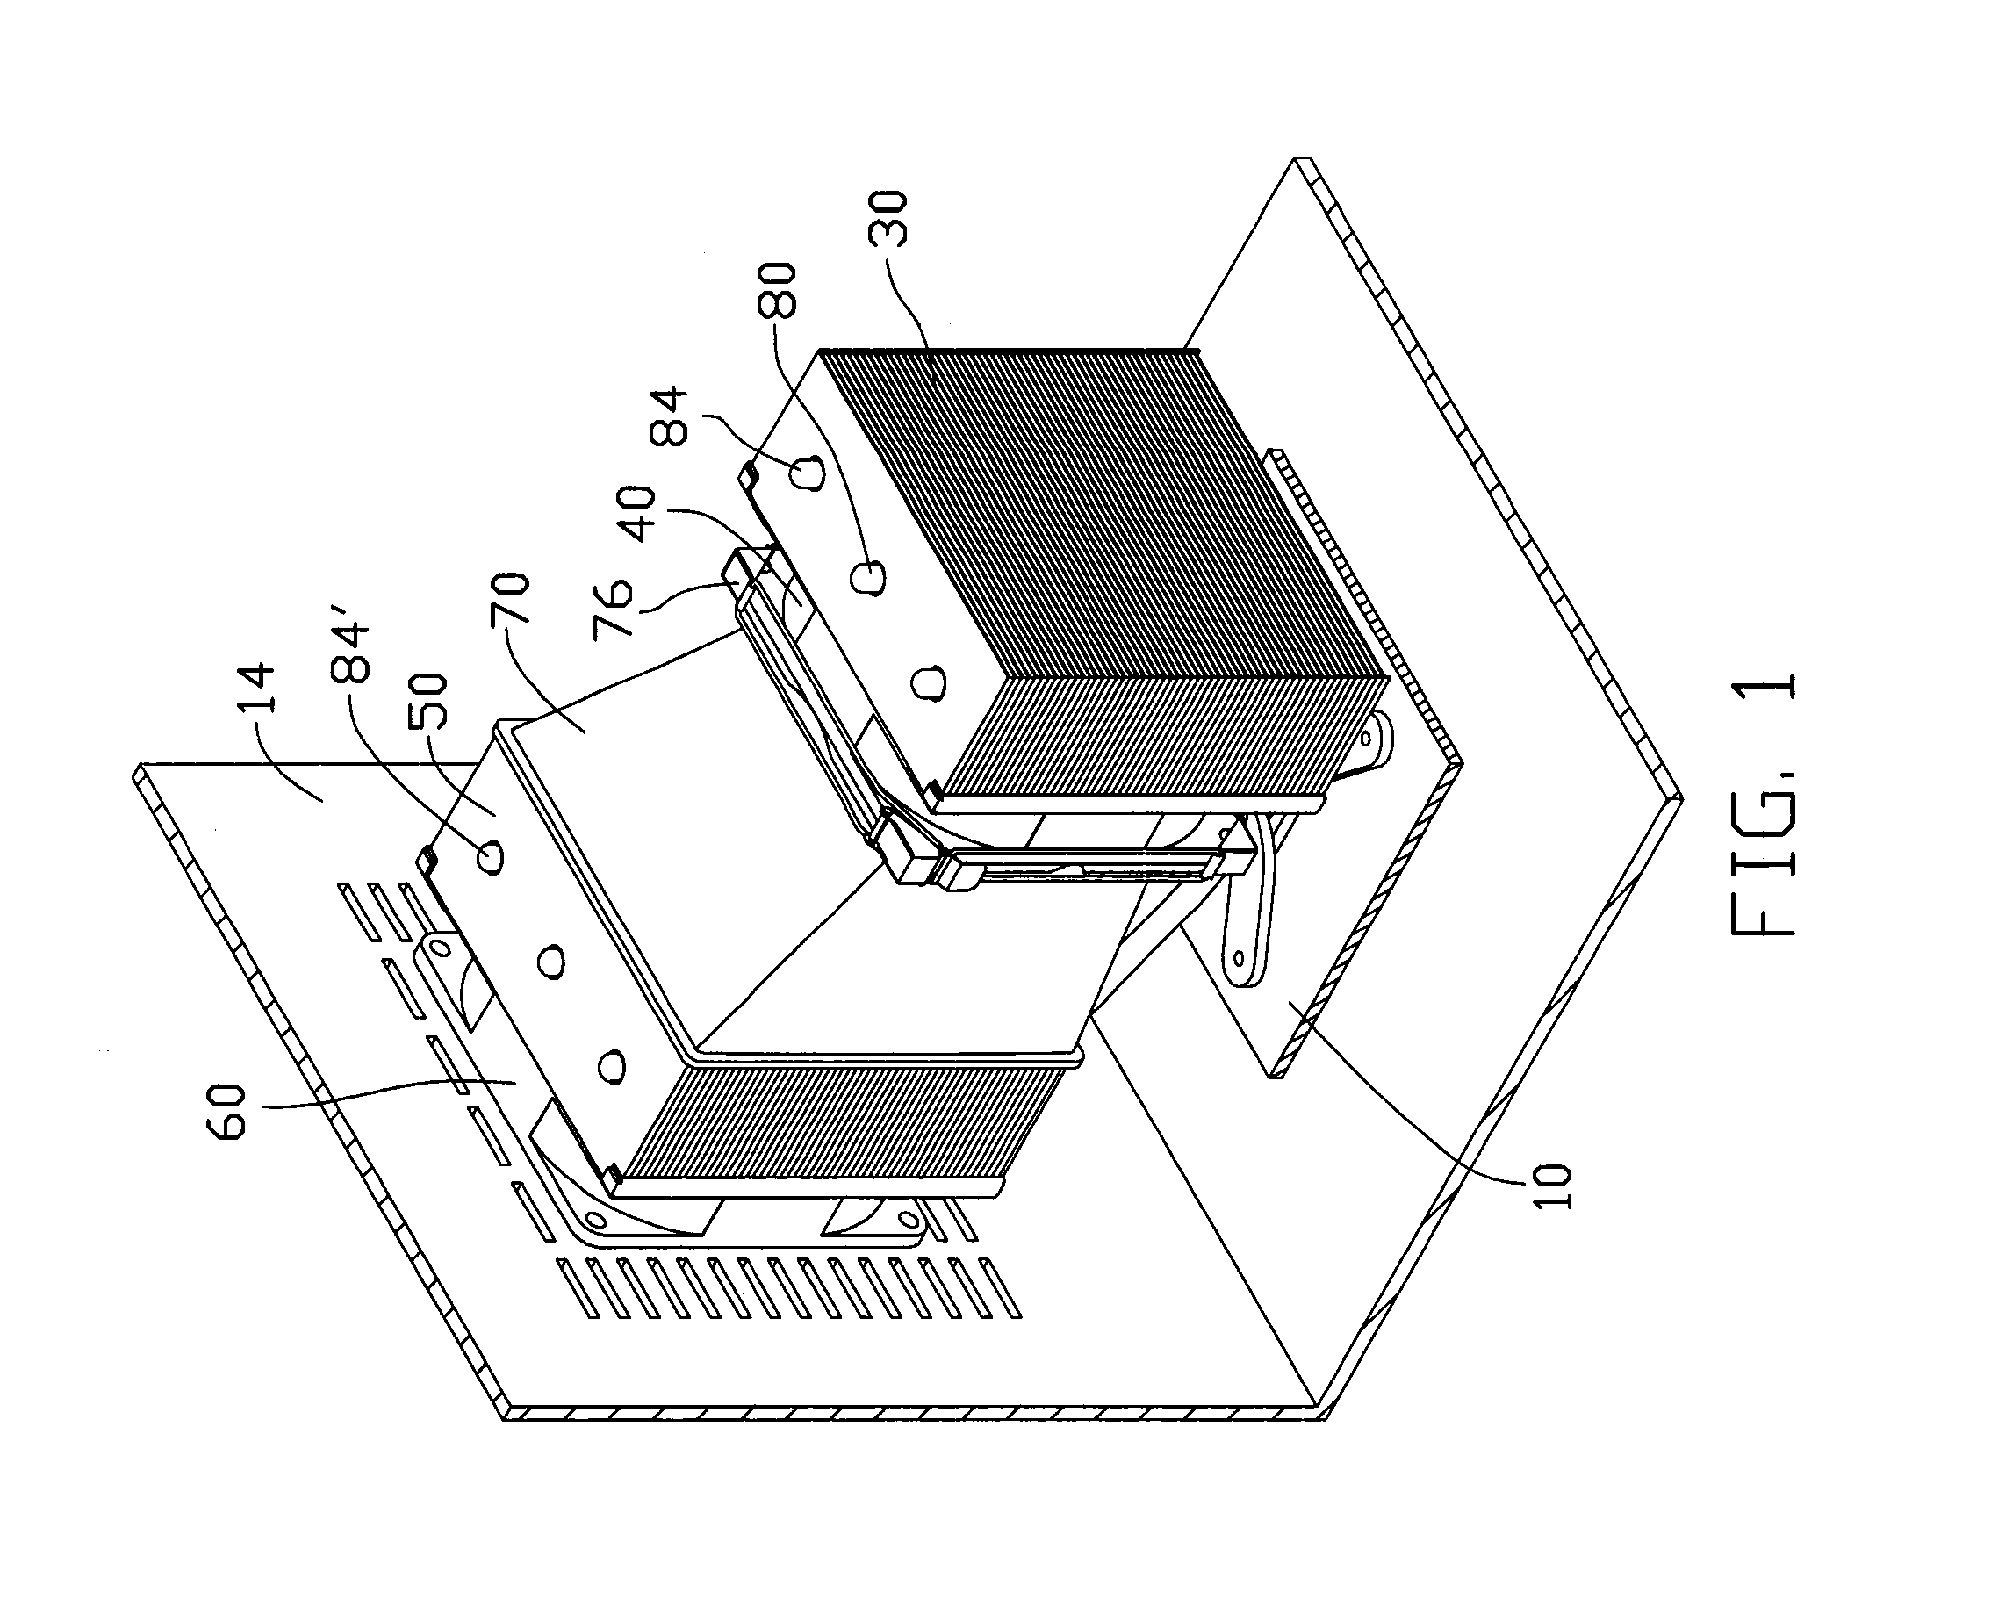 Electronic cooling system having a ventilating duct